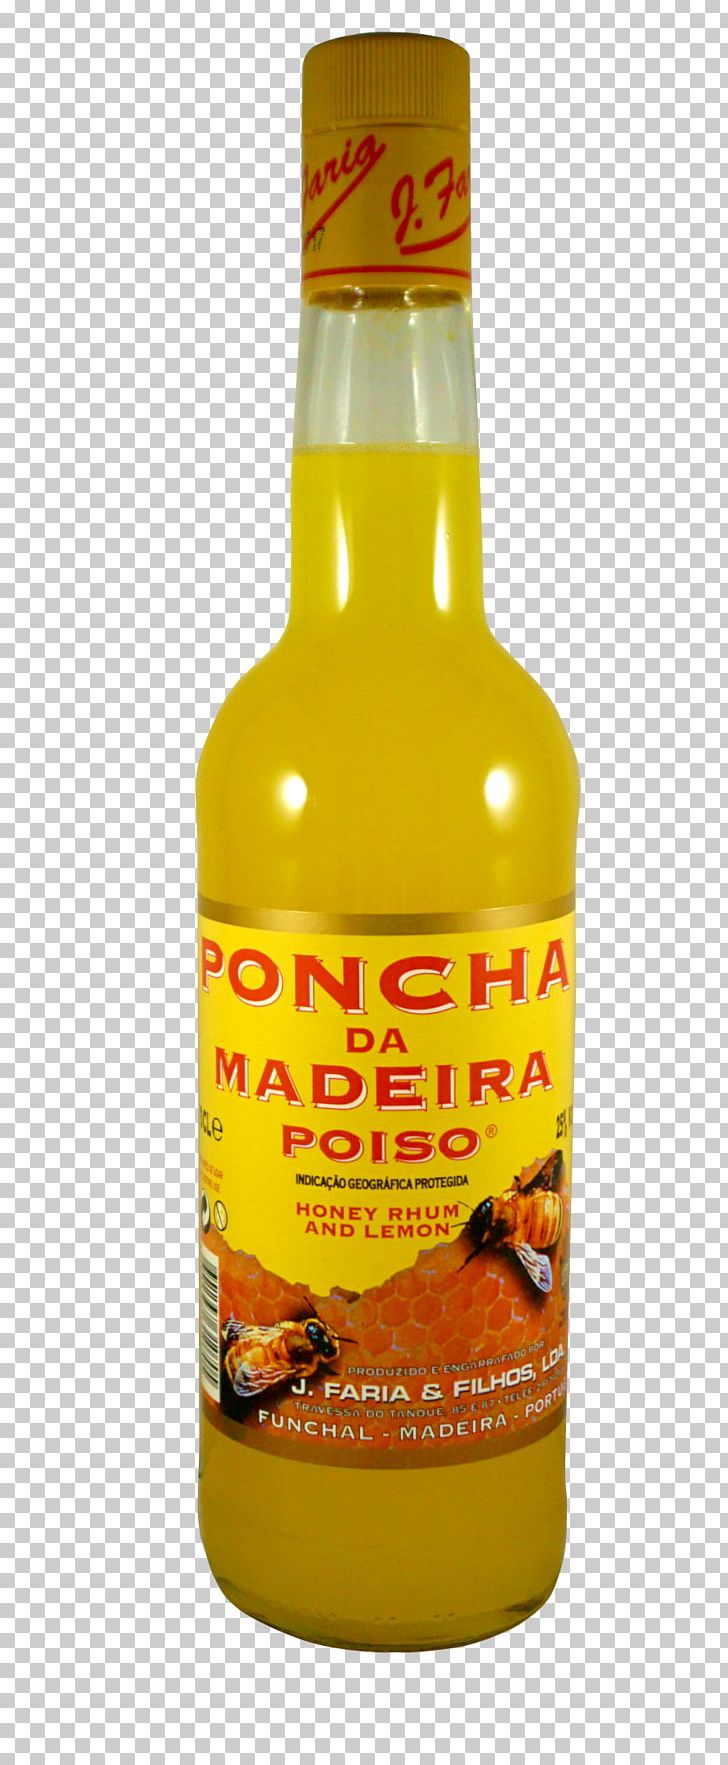 Poncha Madeira Island Liqueur Orange Drink Alcoholic Beverages PNG, Clipart, Alcohol, Alcoholic Beverages, Cocktail, Condiment, Drink Free PNG Download